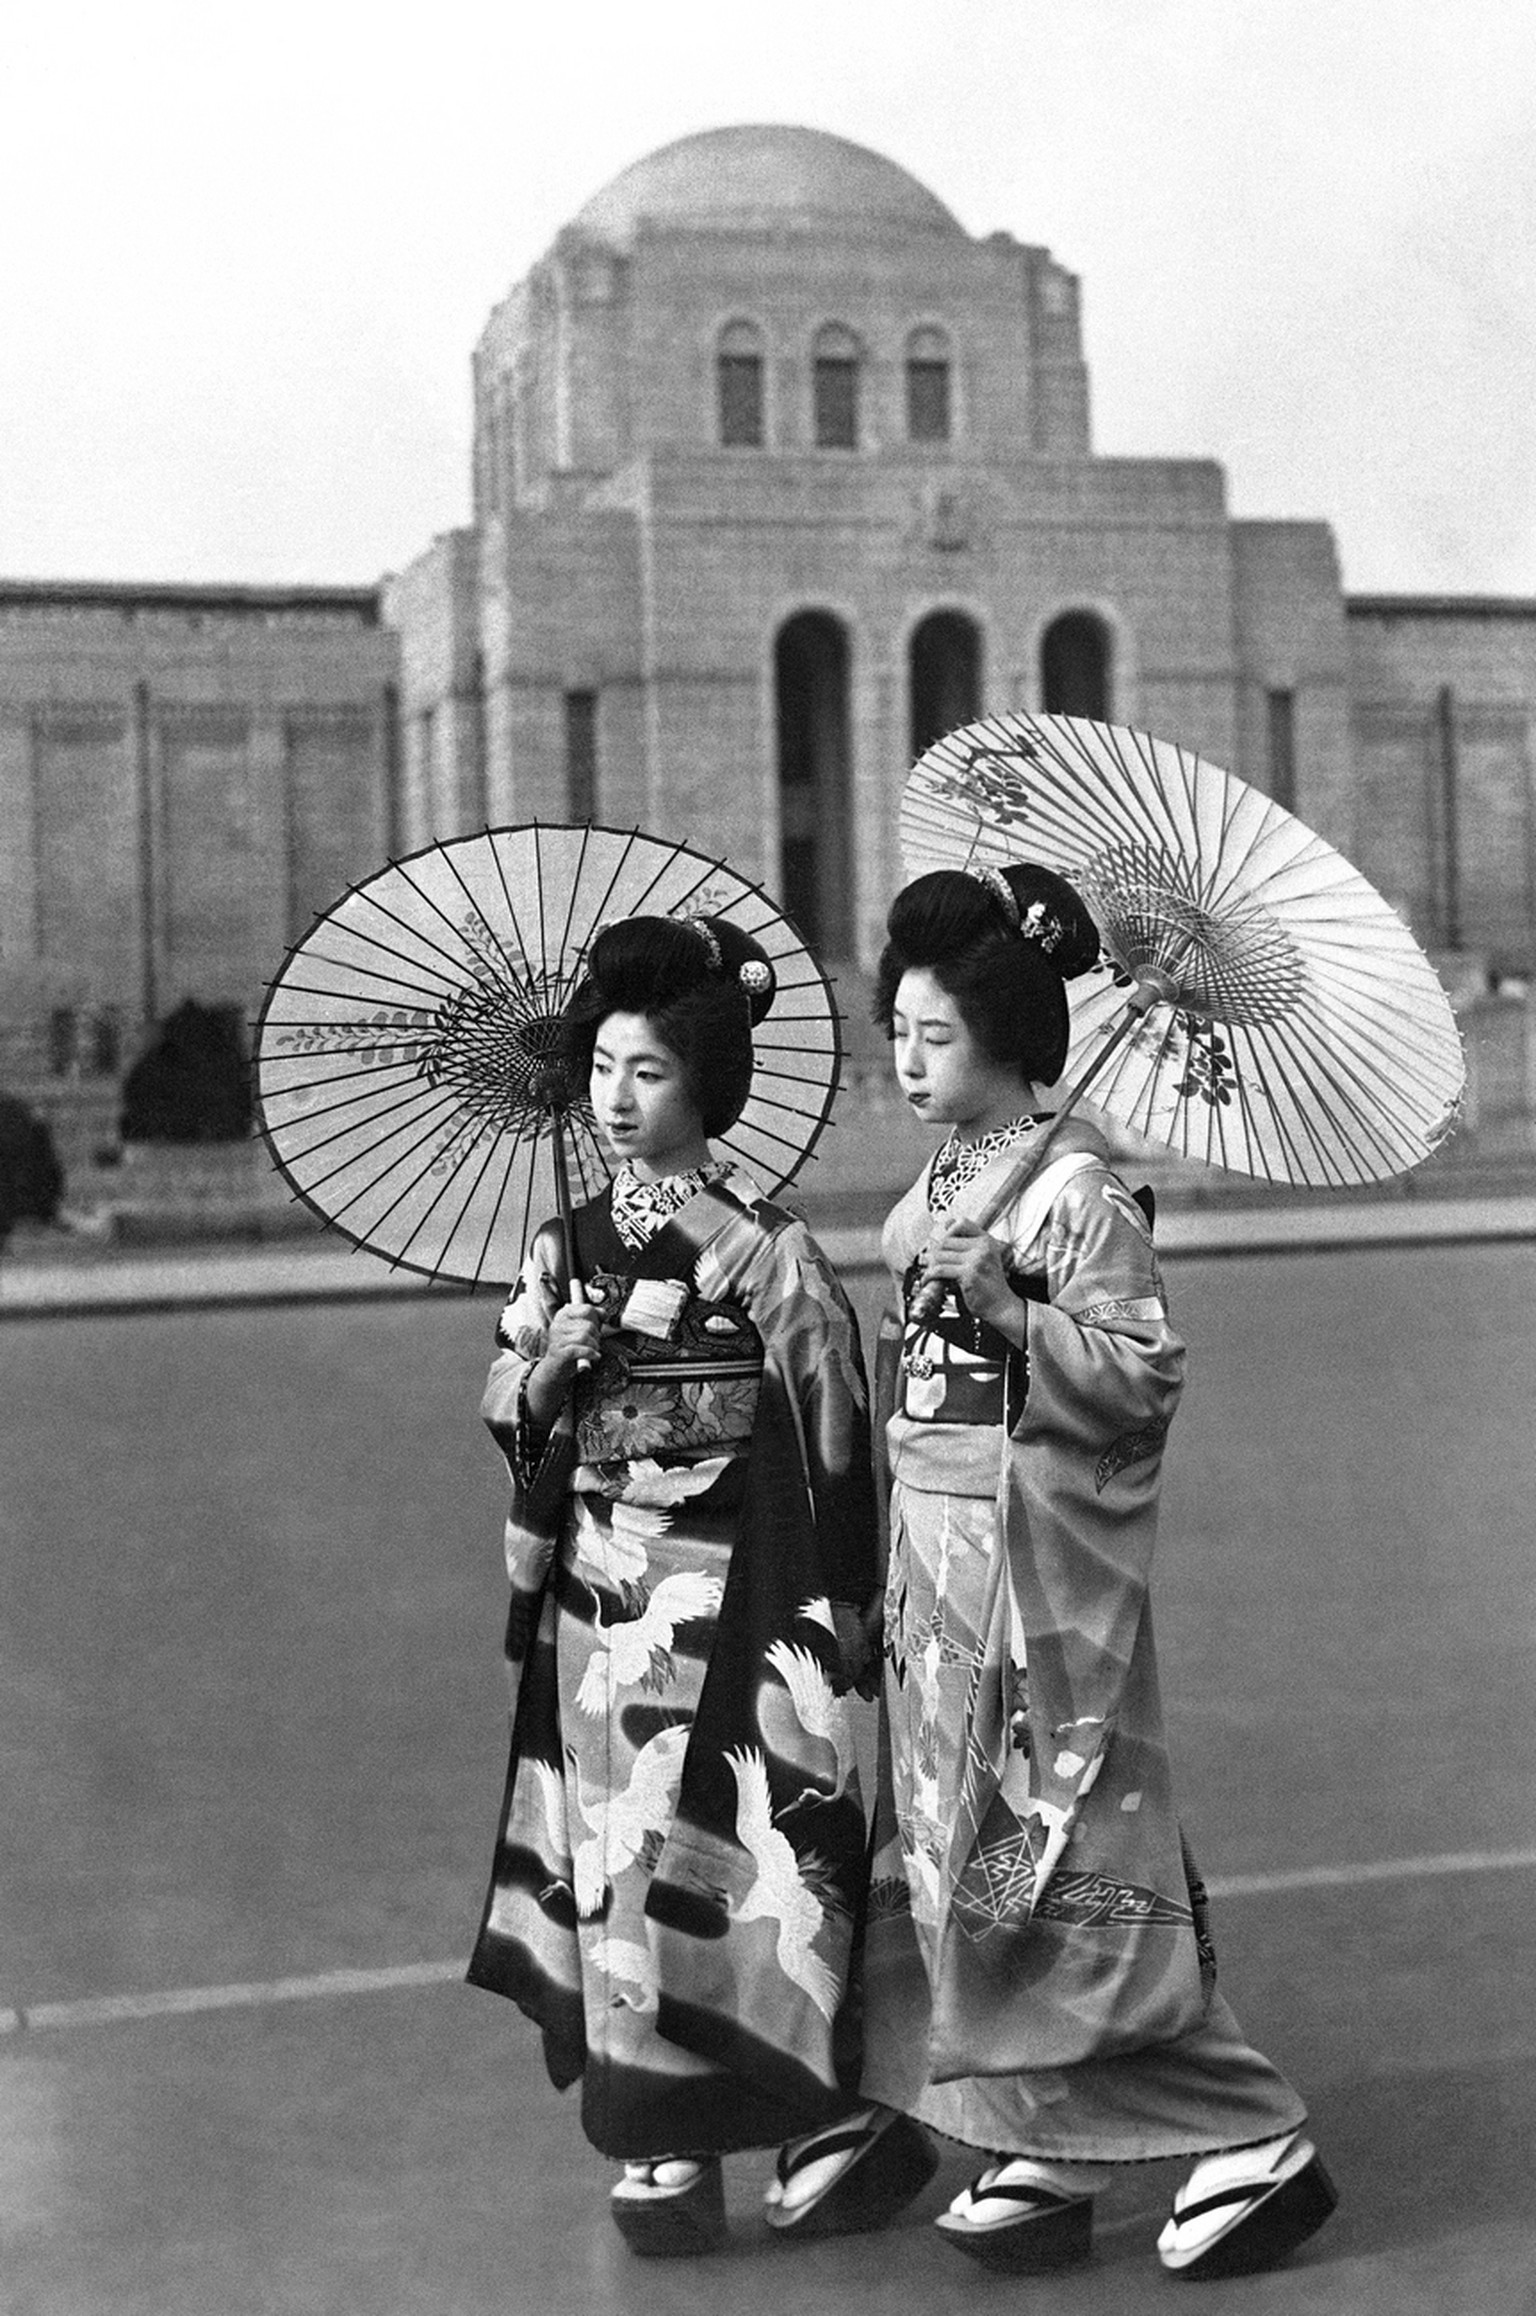 When Geisha girls open their guaze parasols and stroll the streets it is a sure sign of spring in Tokyo, on April 12, 1937. (AP Photo)